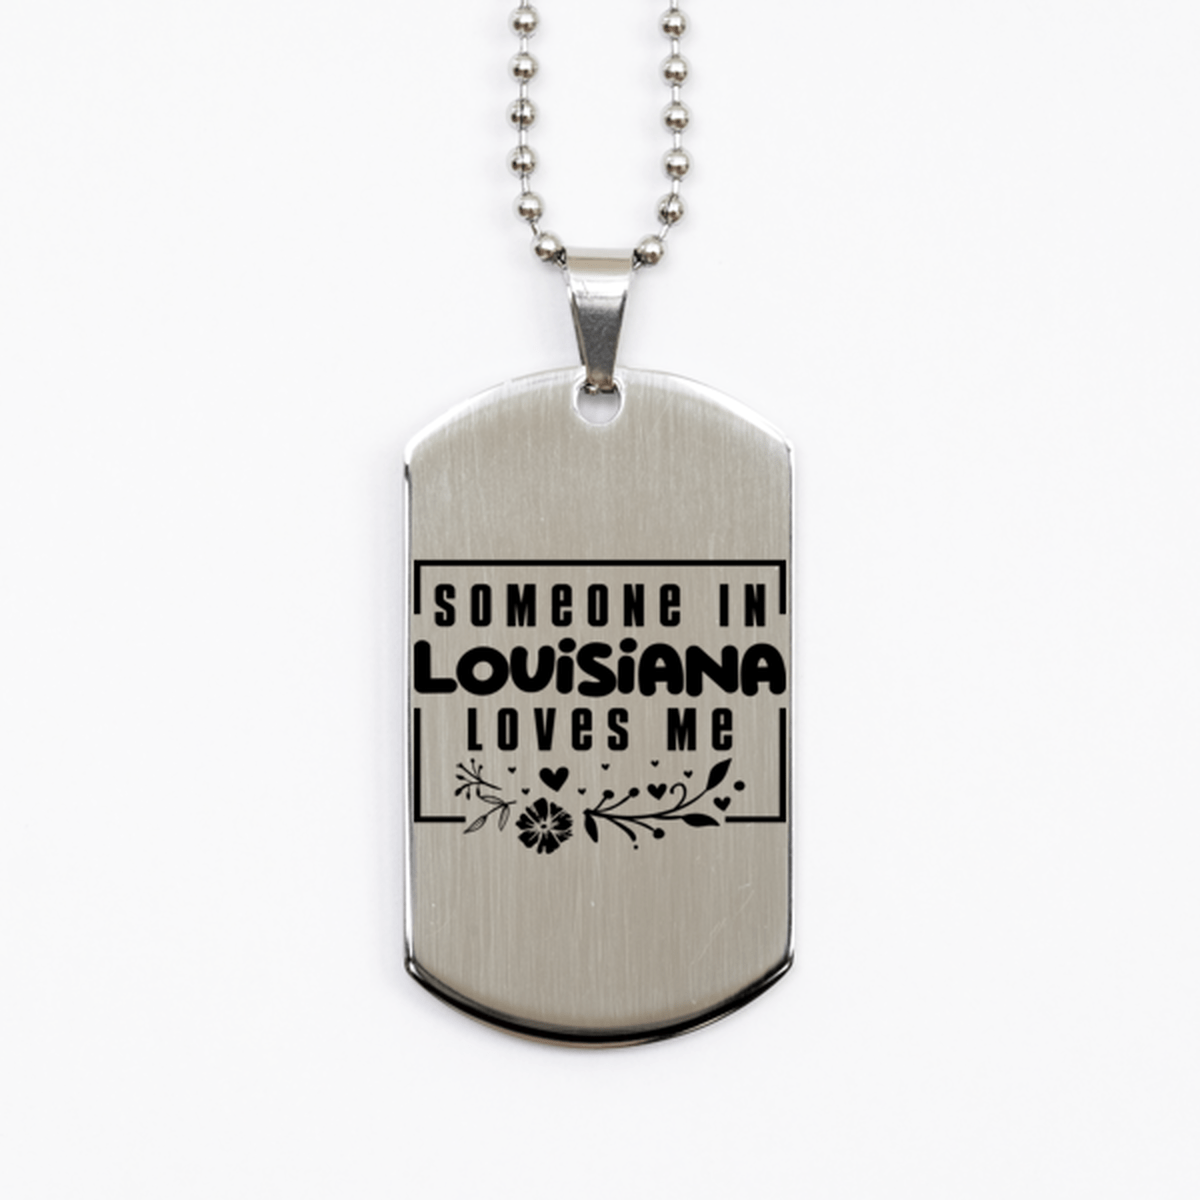 Cute Louisiana Silver Dog Tag Necklace, Someone in Louisiana Loves Me, Best Birthday Gifts from Louisiana Friends & Family